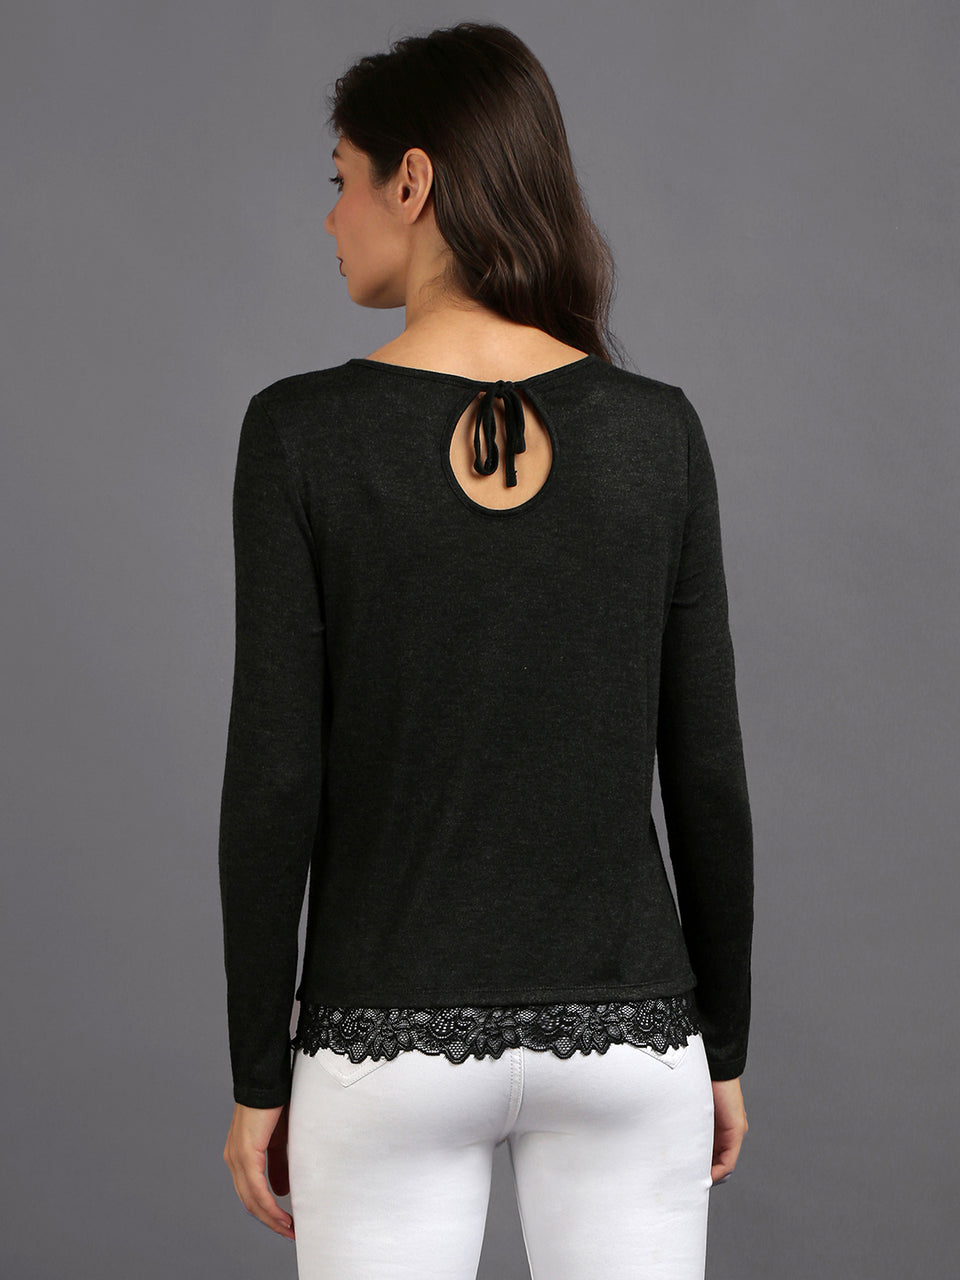 women black embroidered long sleeve tops